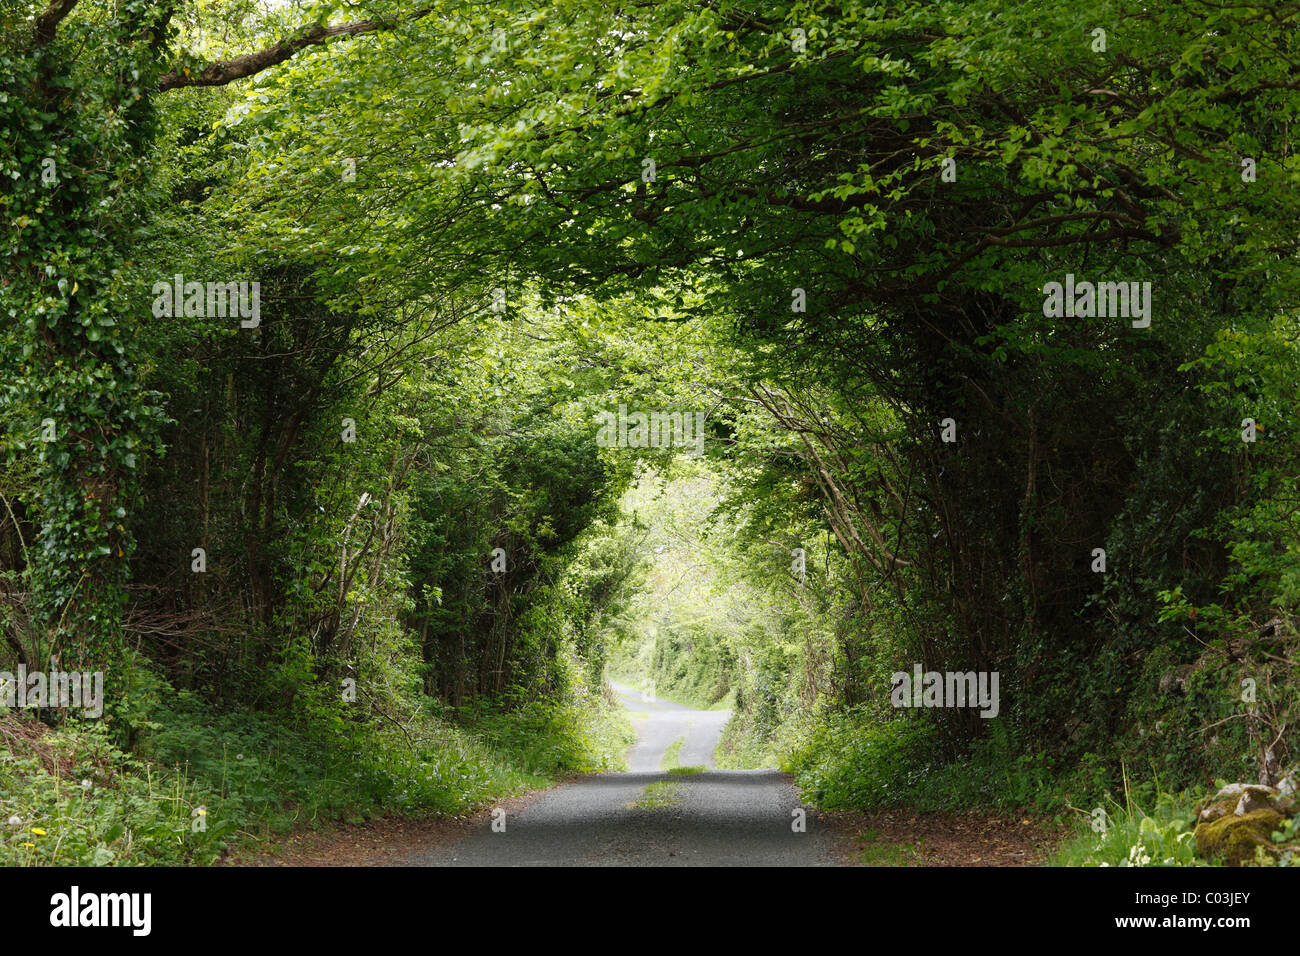 Small road through forest, Burren, County Clare, Ireland, Europe Stock Photo